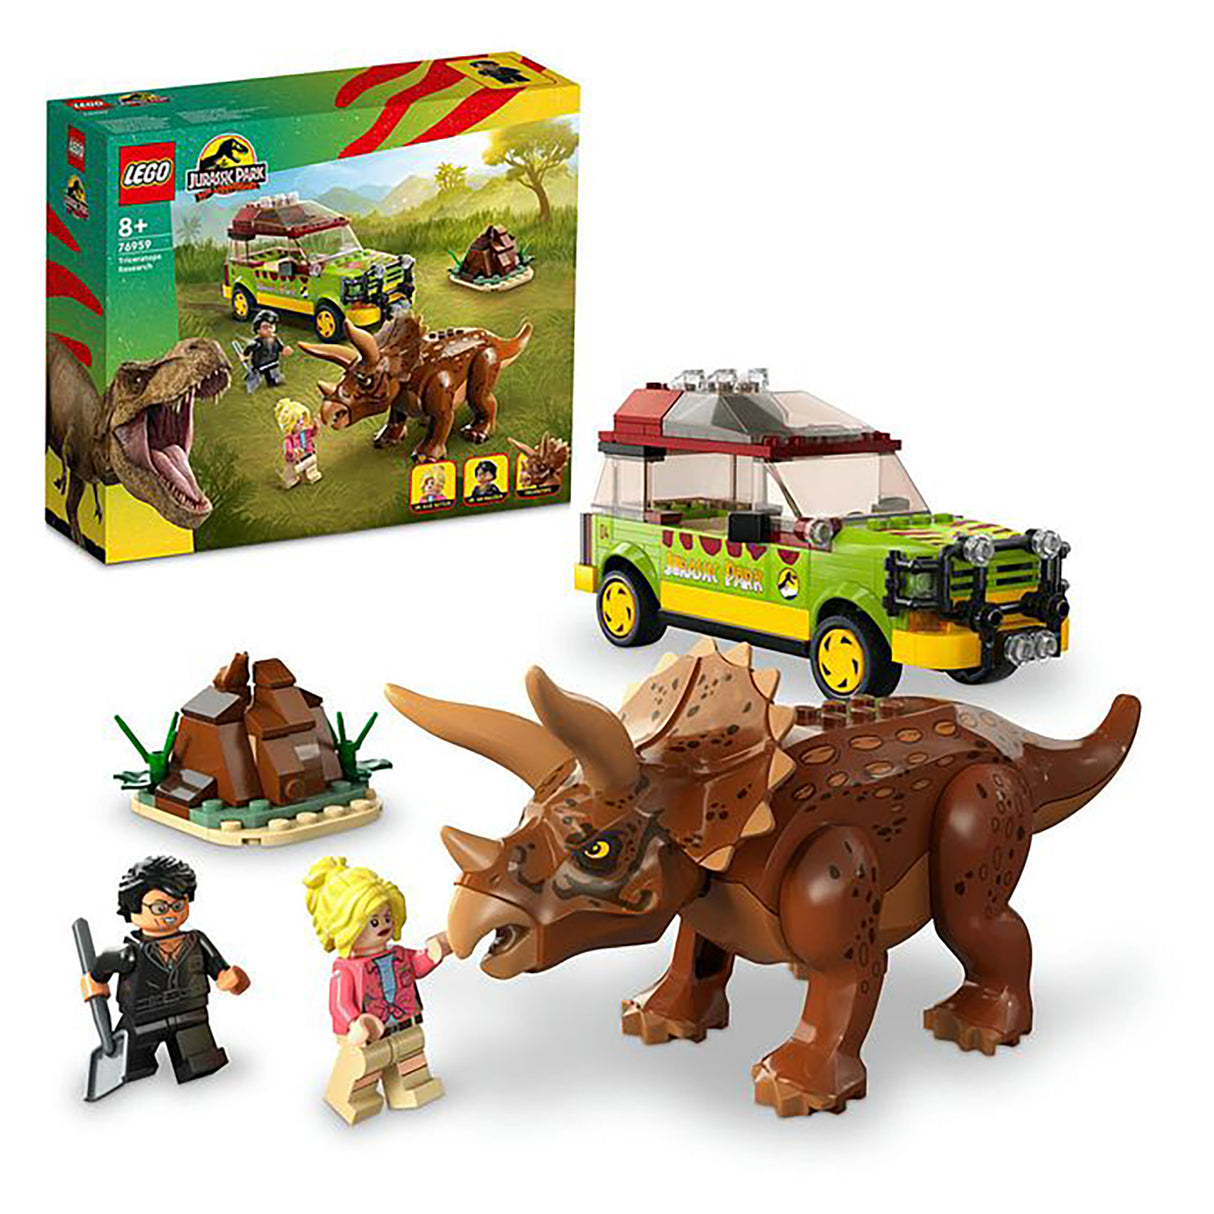 LEGO Jurassic Park Triceratops Research 76959 (281 pieces)